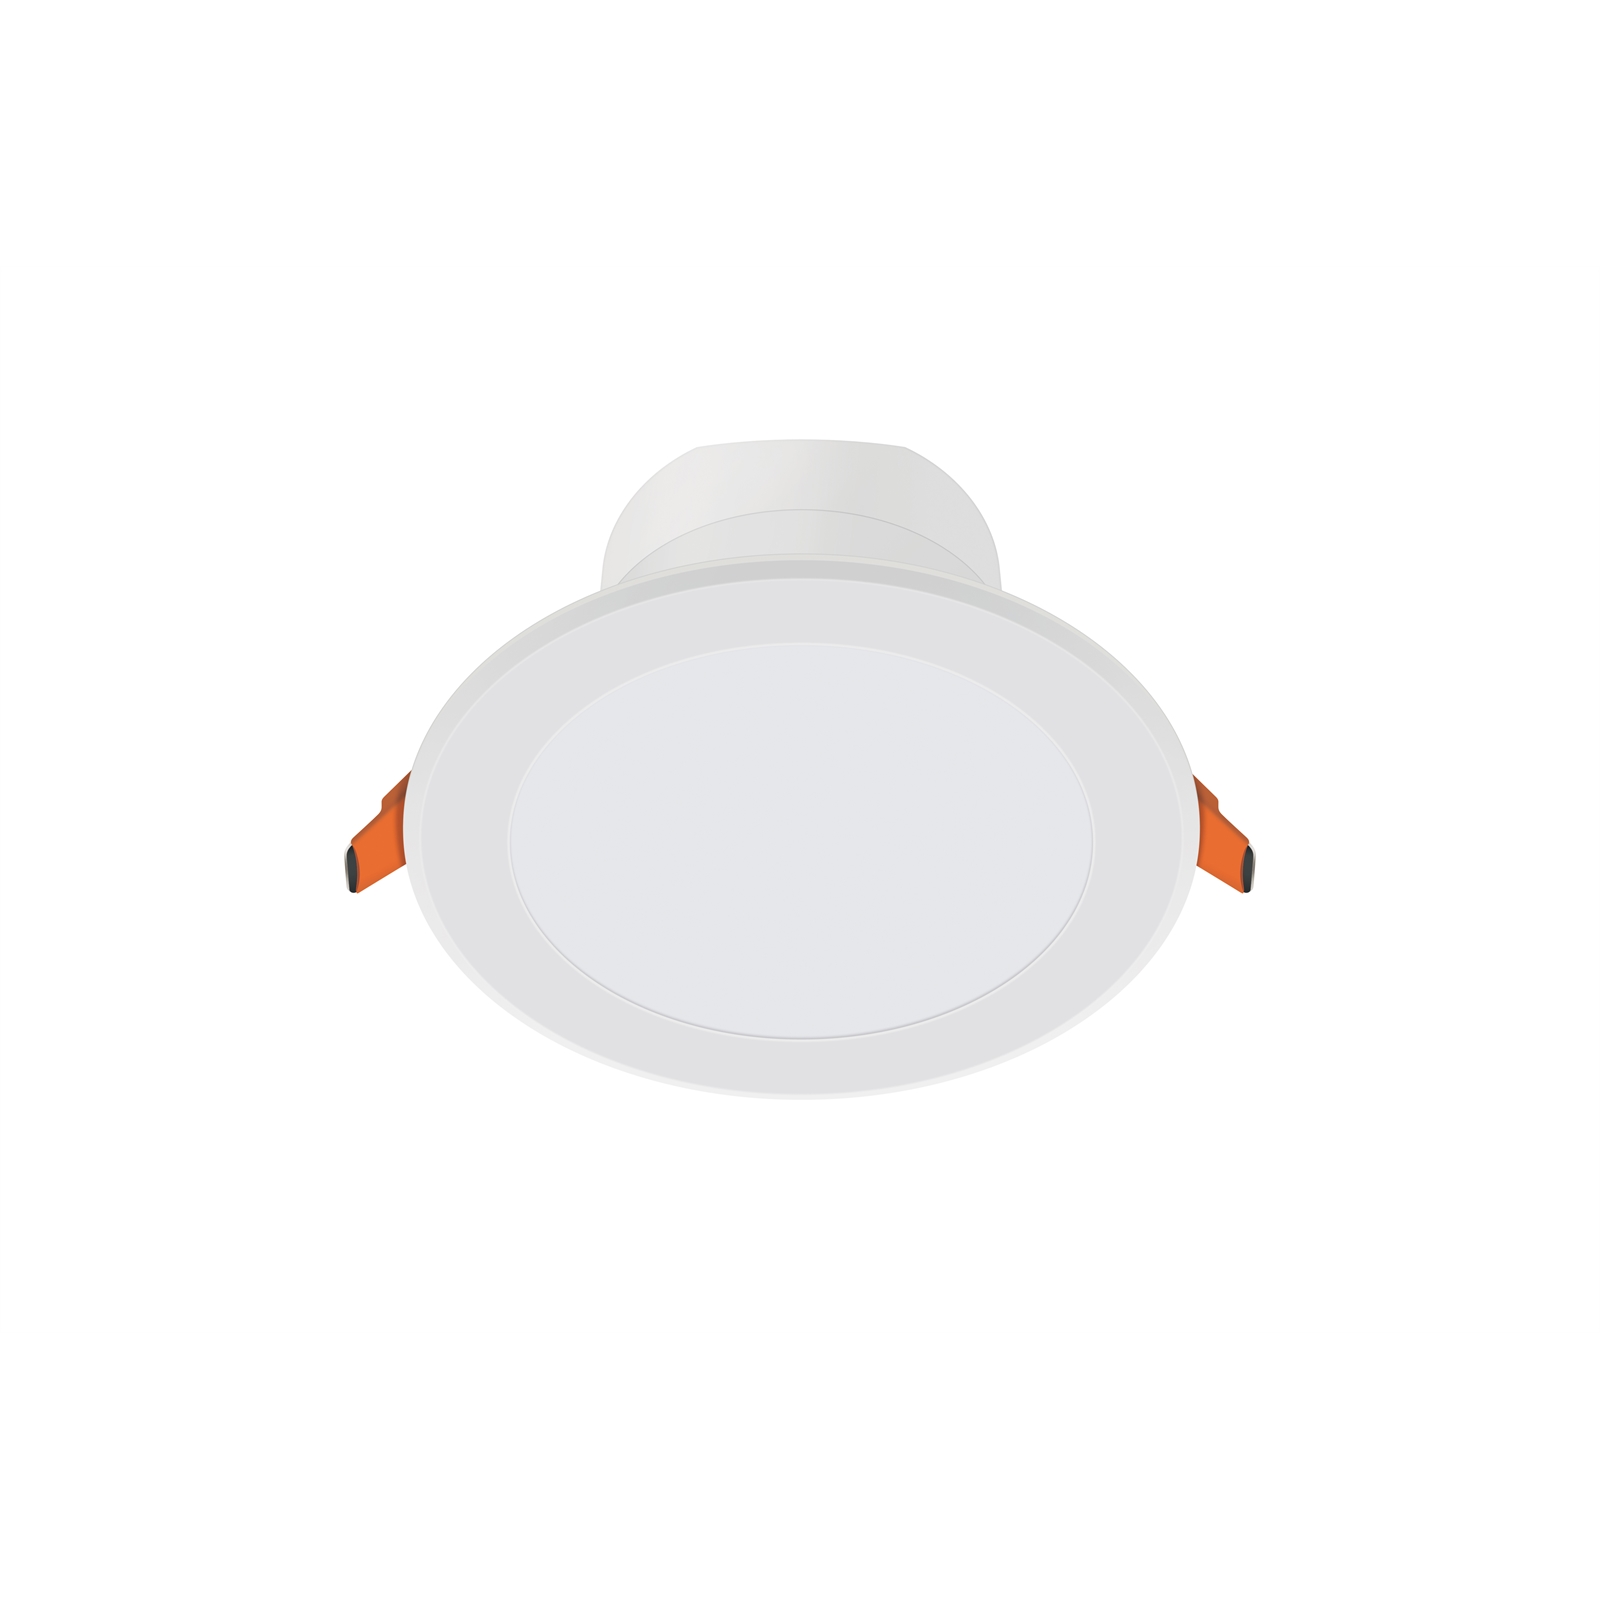 Osram 240V 10.5W LED 900lm Daylight Dimmable Fixed Downlight